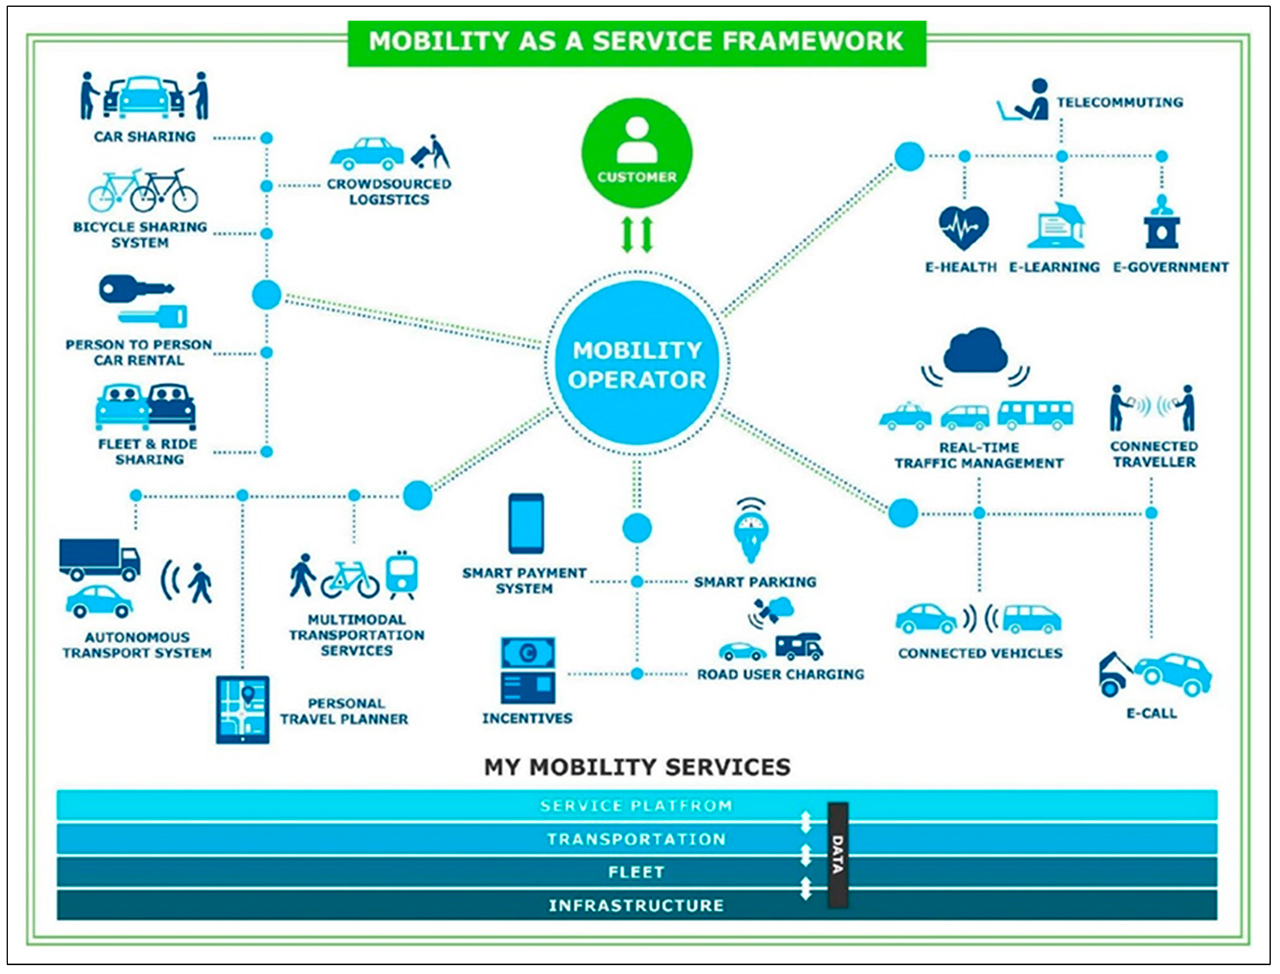 State of the Art of Mobility as a Service (MaaS) Ecosystems and Architectures—An Overview of, and a Definition, Ecosystem and System Architecture for Electric Mobility as a Service (eMaaS) (Image from Kivimäki et al.)